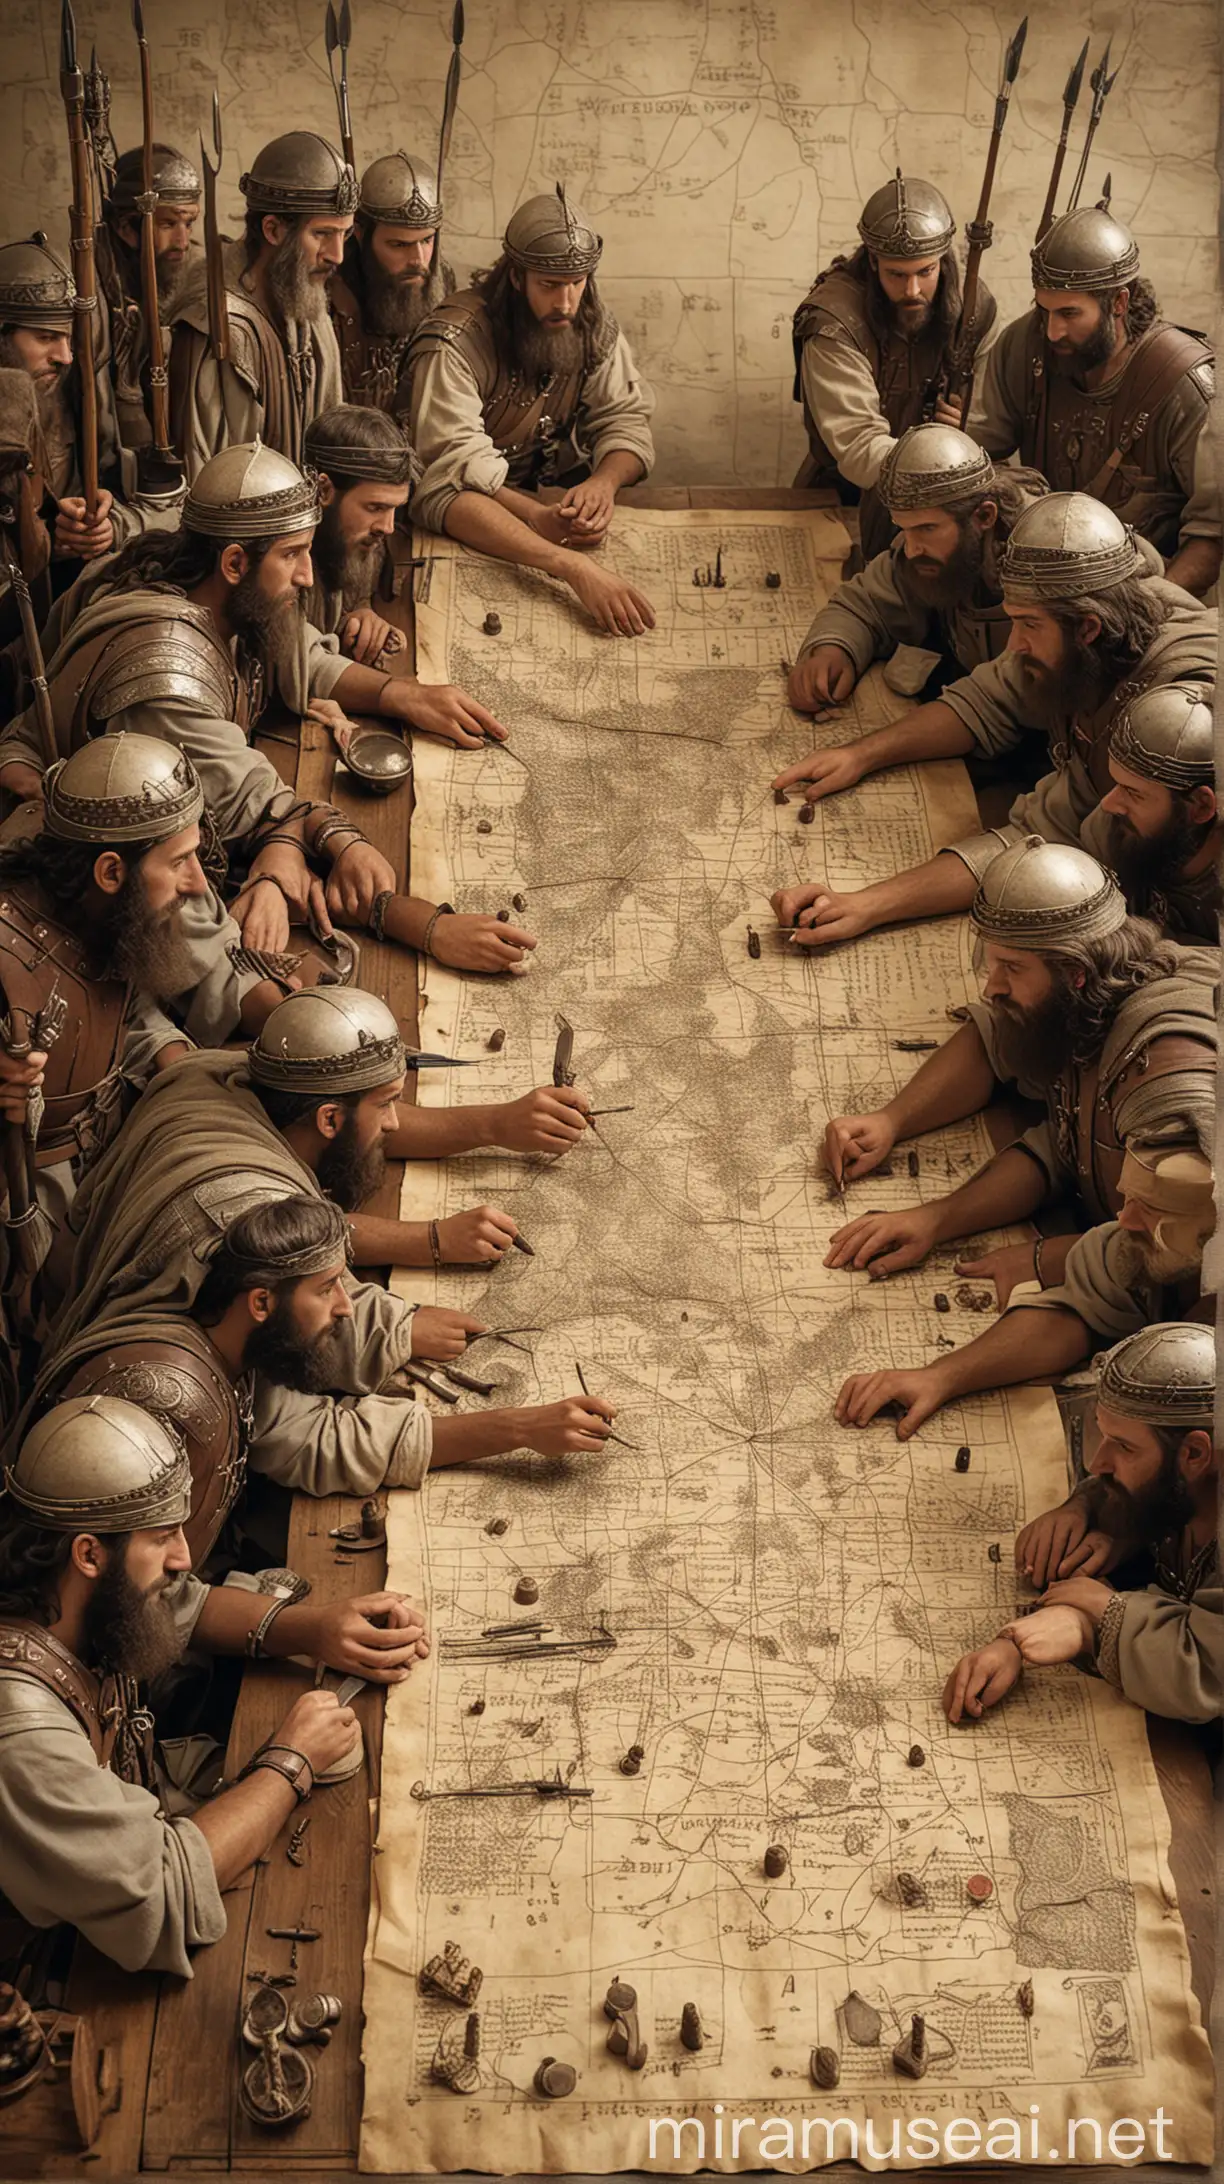 Ancient Hebrew Soldiers Strategizing with Maps and Scrolls